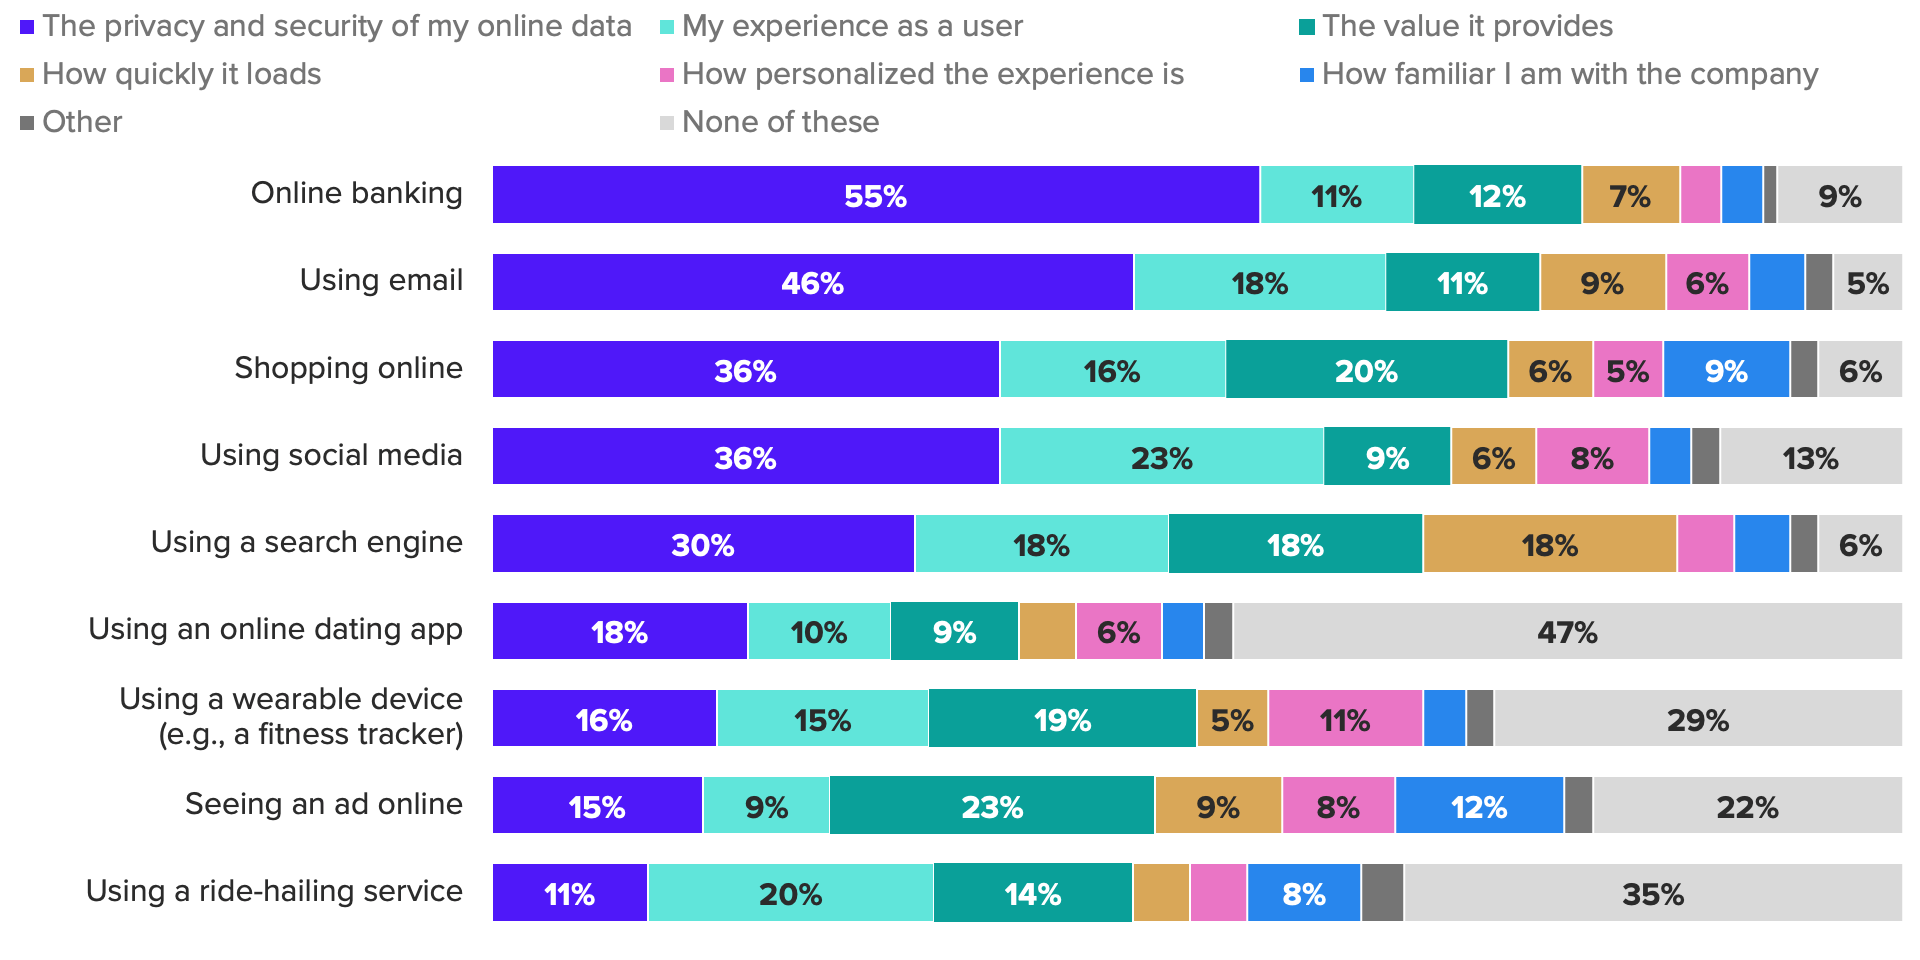 Bar chart of the top considerations for consumer across online activities, showing consumers most value privacy and security of online data in several online activities.